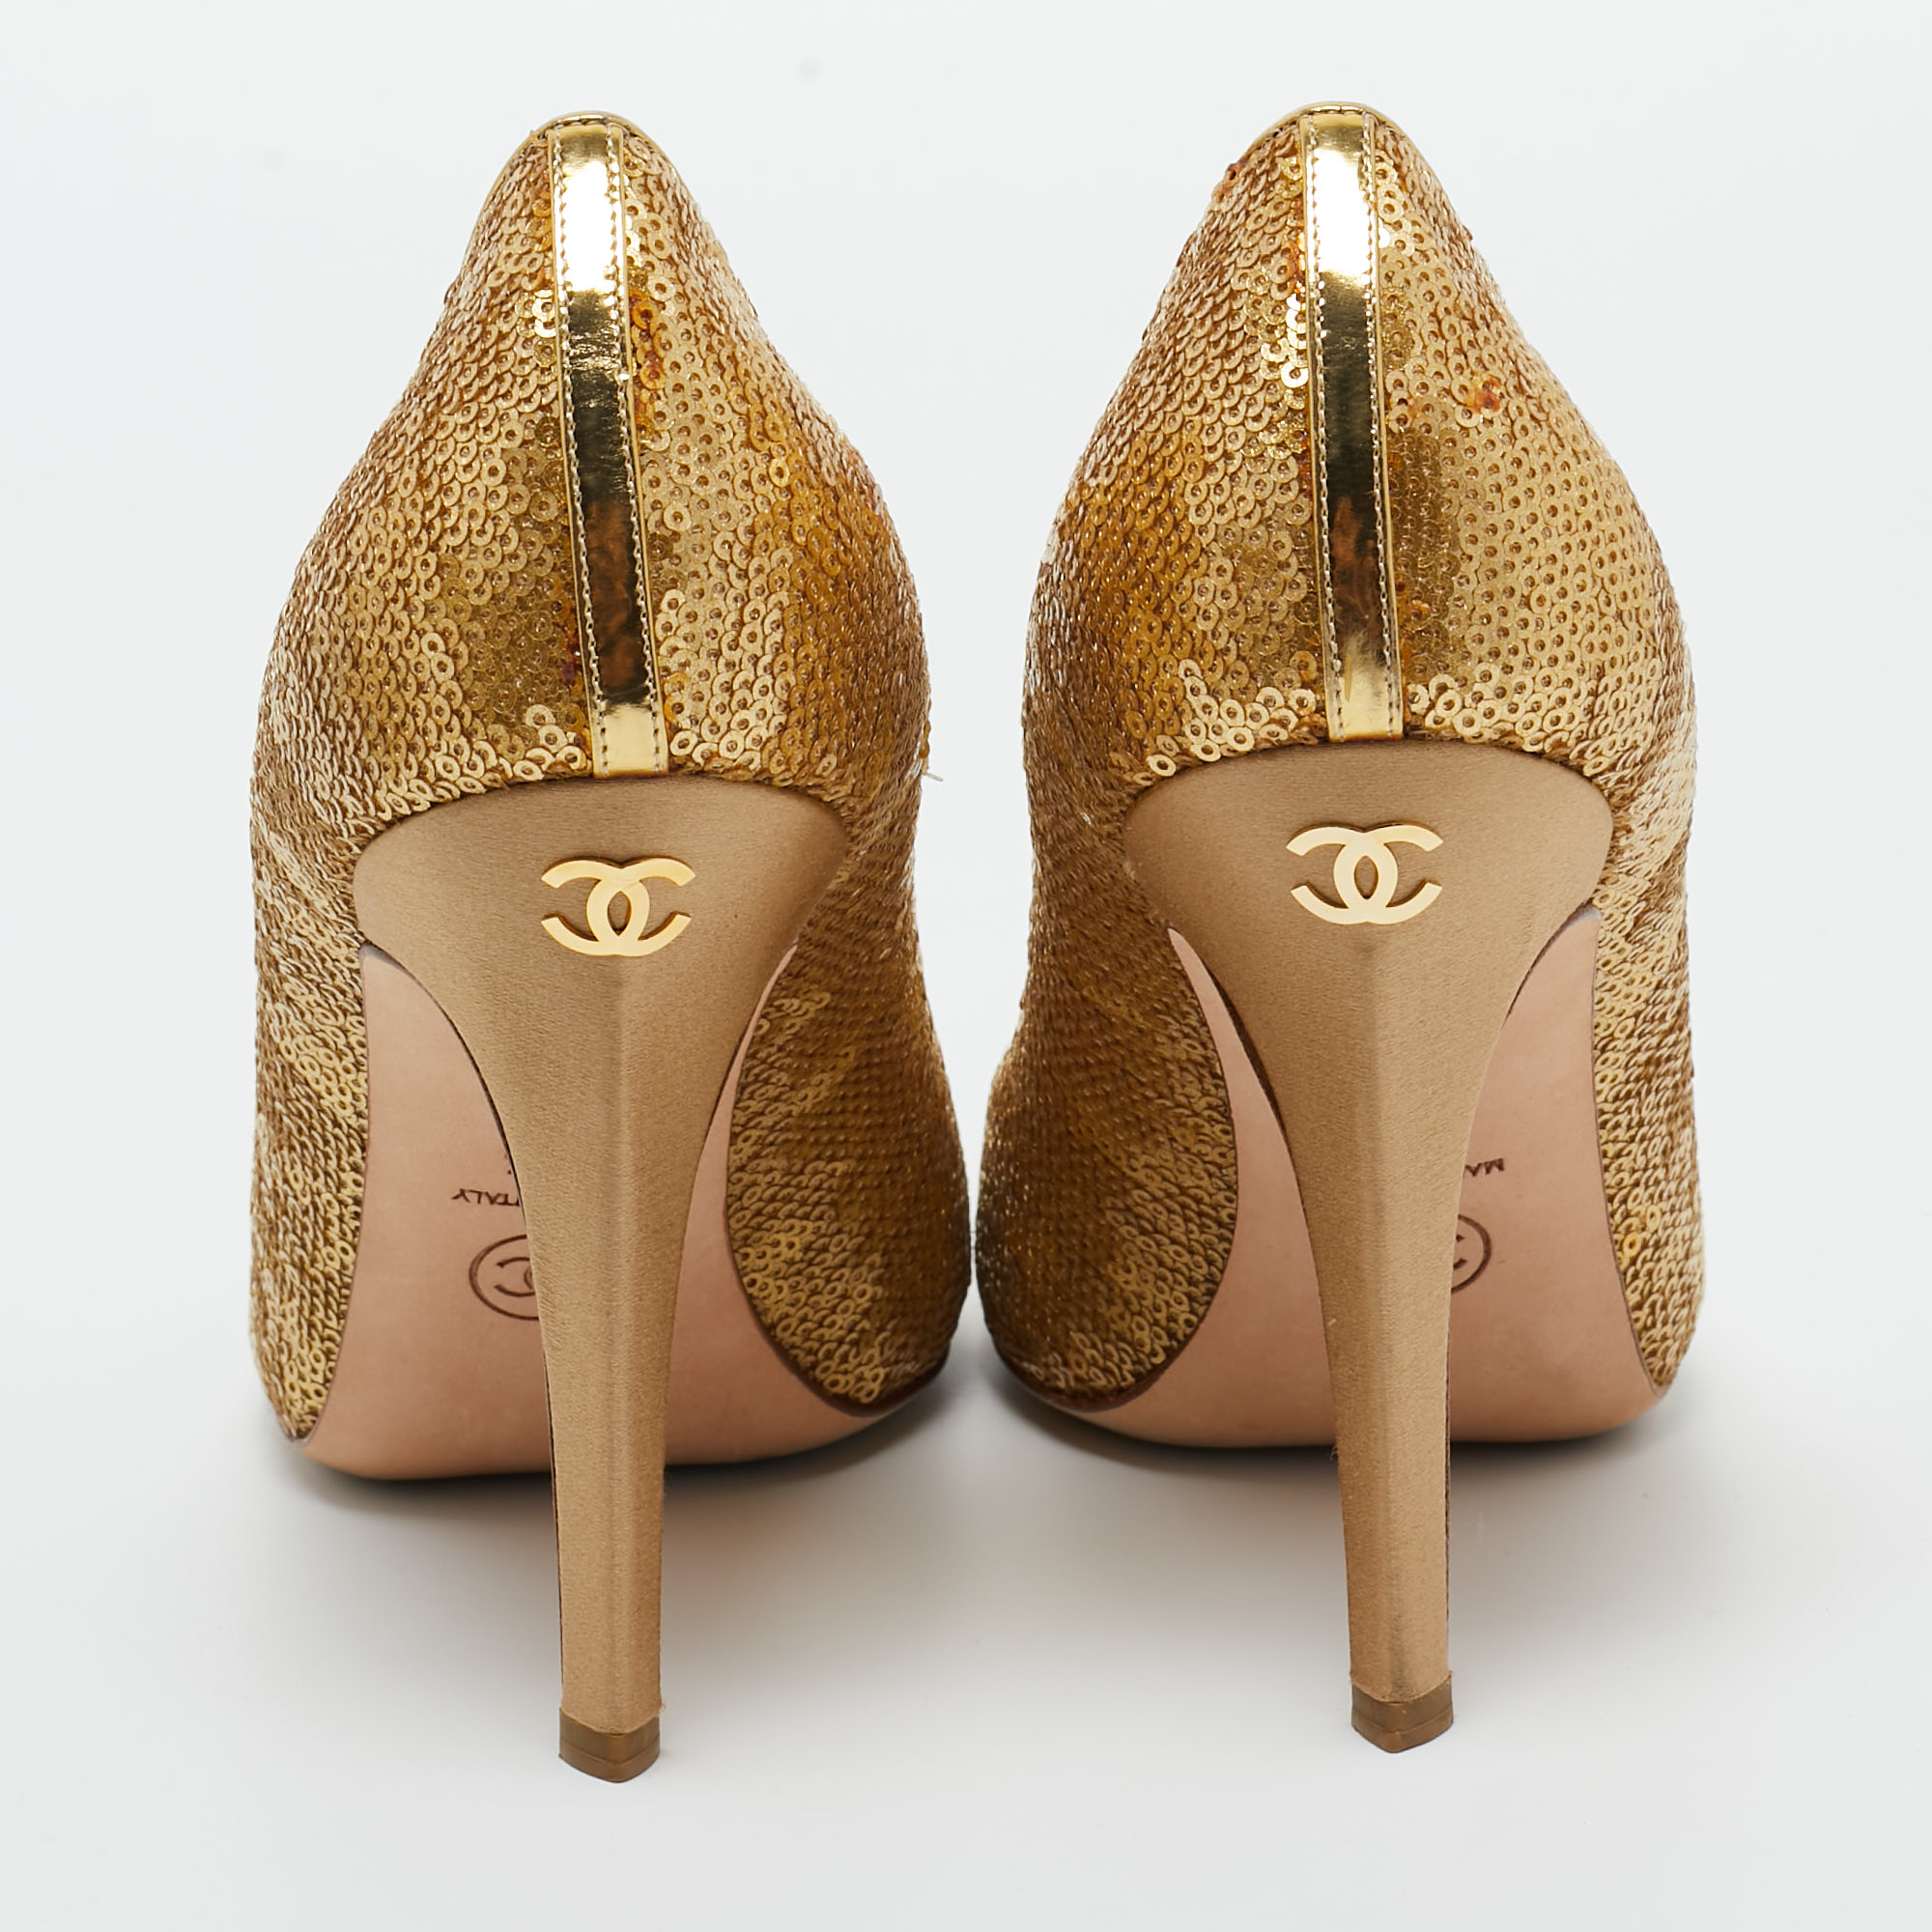 Chanel Gold Sequins Round Toe Pumps 39.5